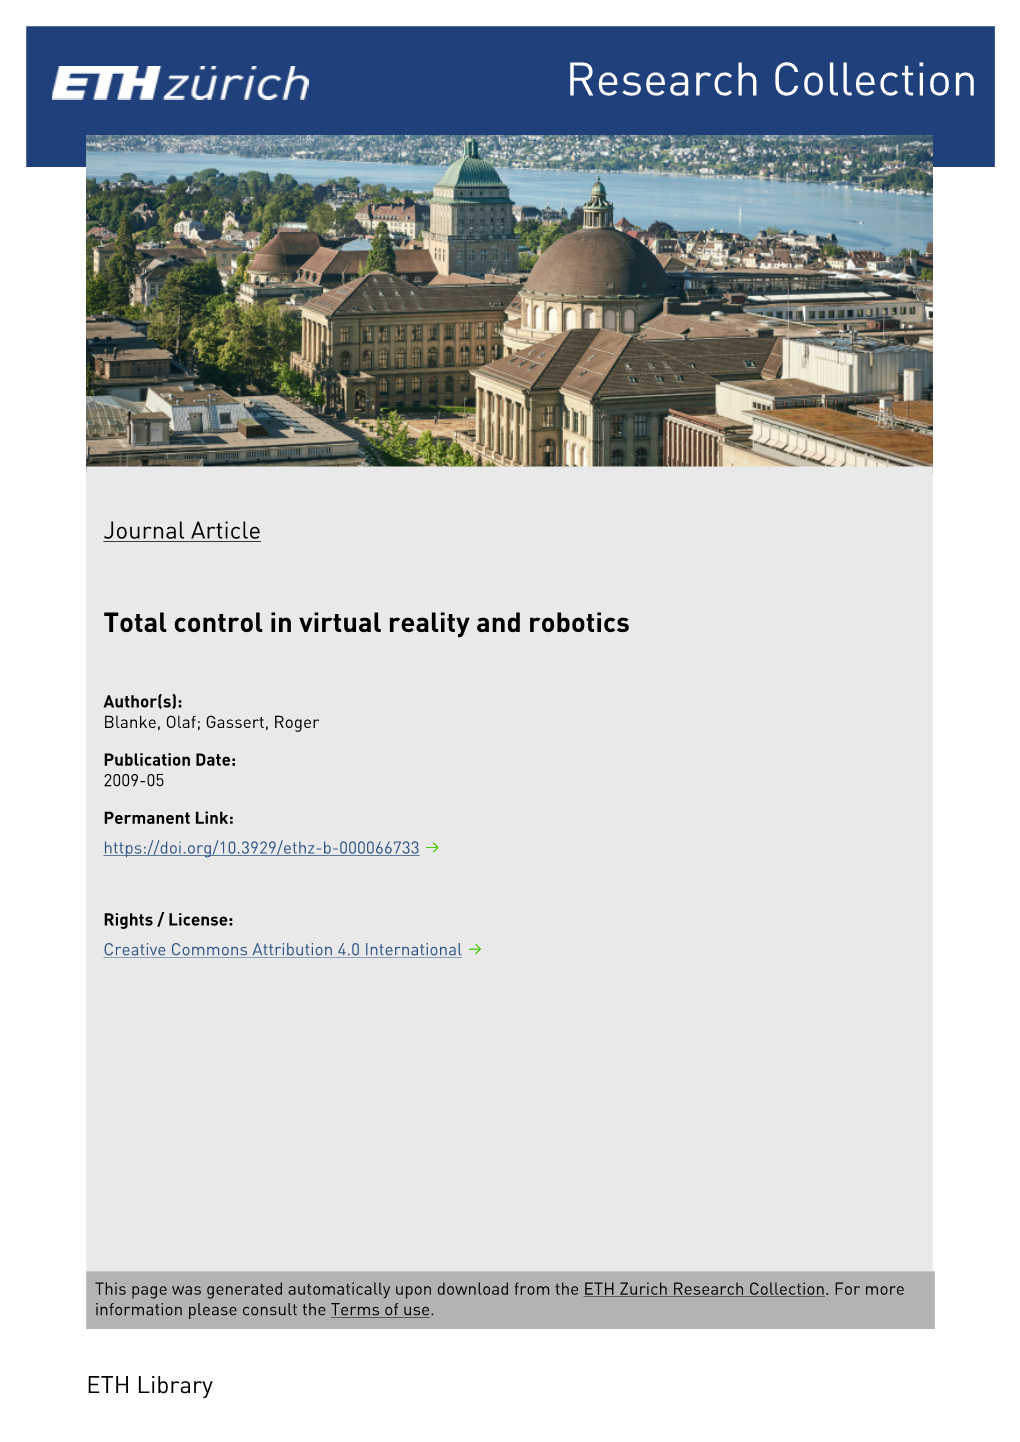 Total Control in Virtual Reality and Robotics